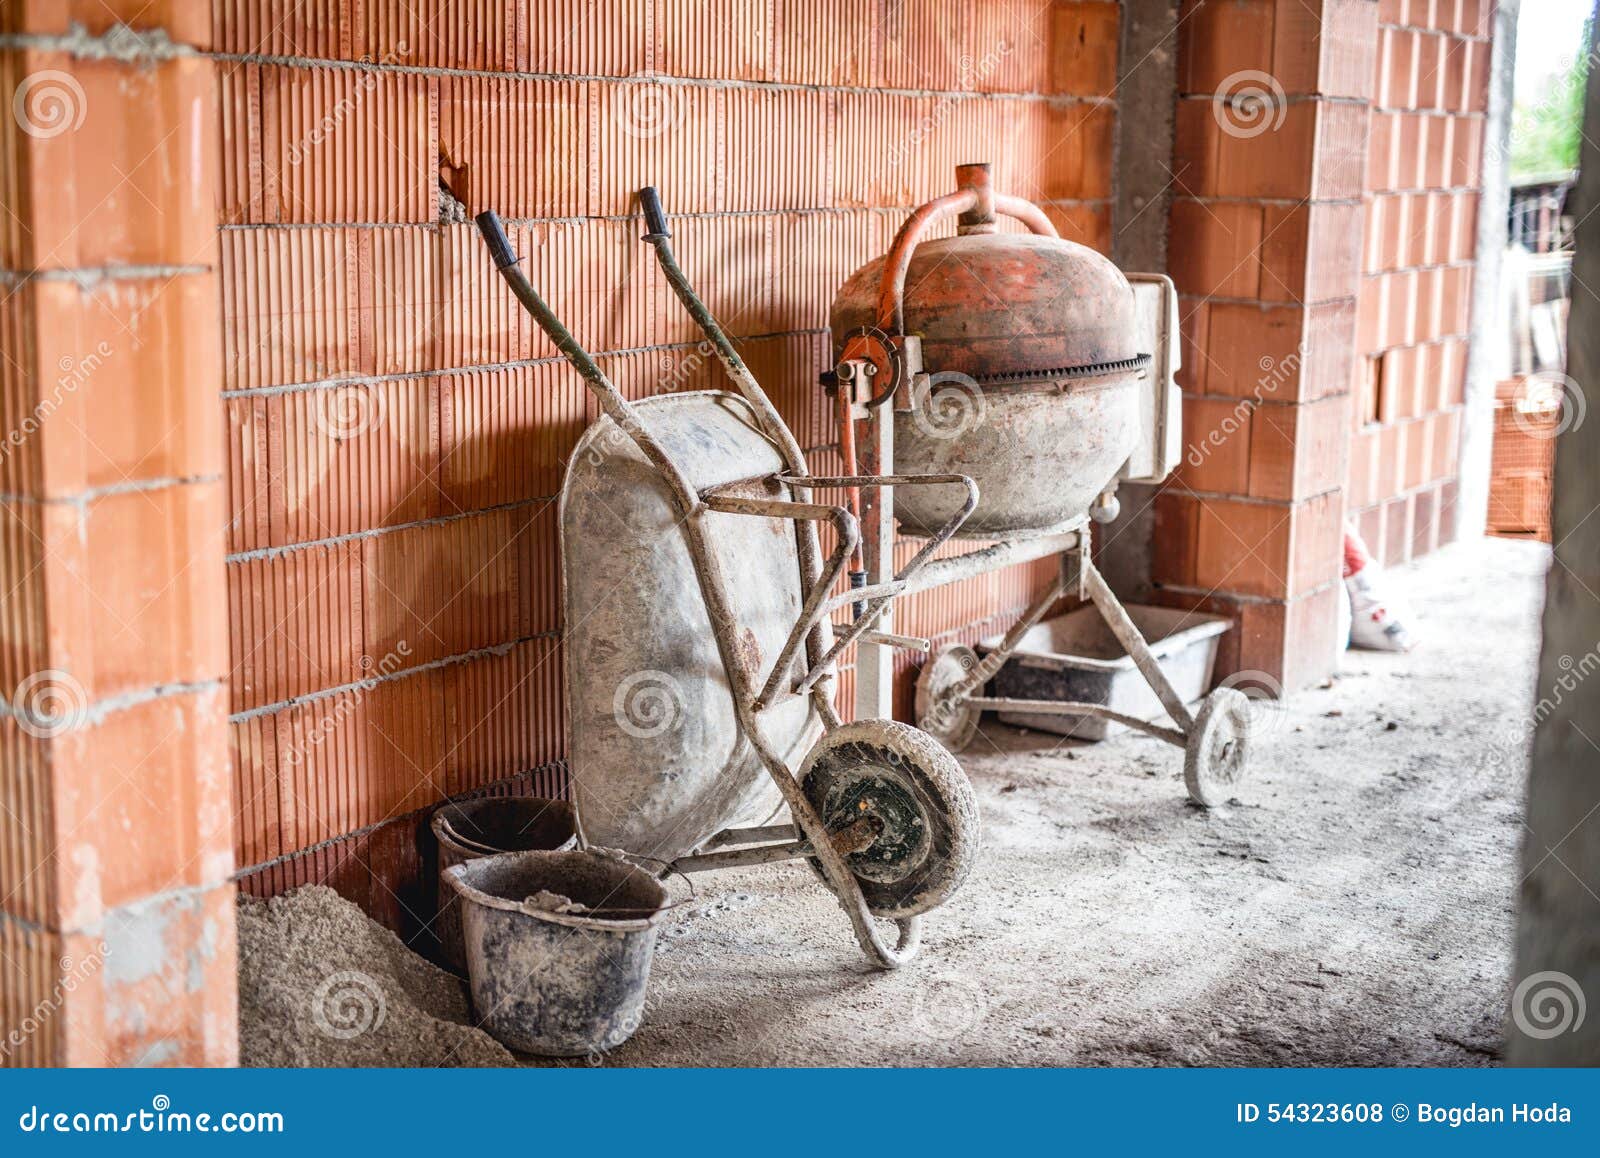 Cement Mixer Machine, Wheel Barrow and Other Construction Site Tools